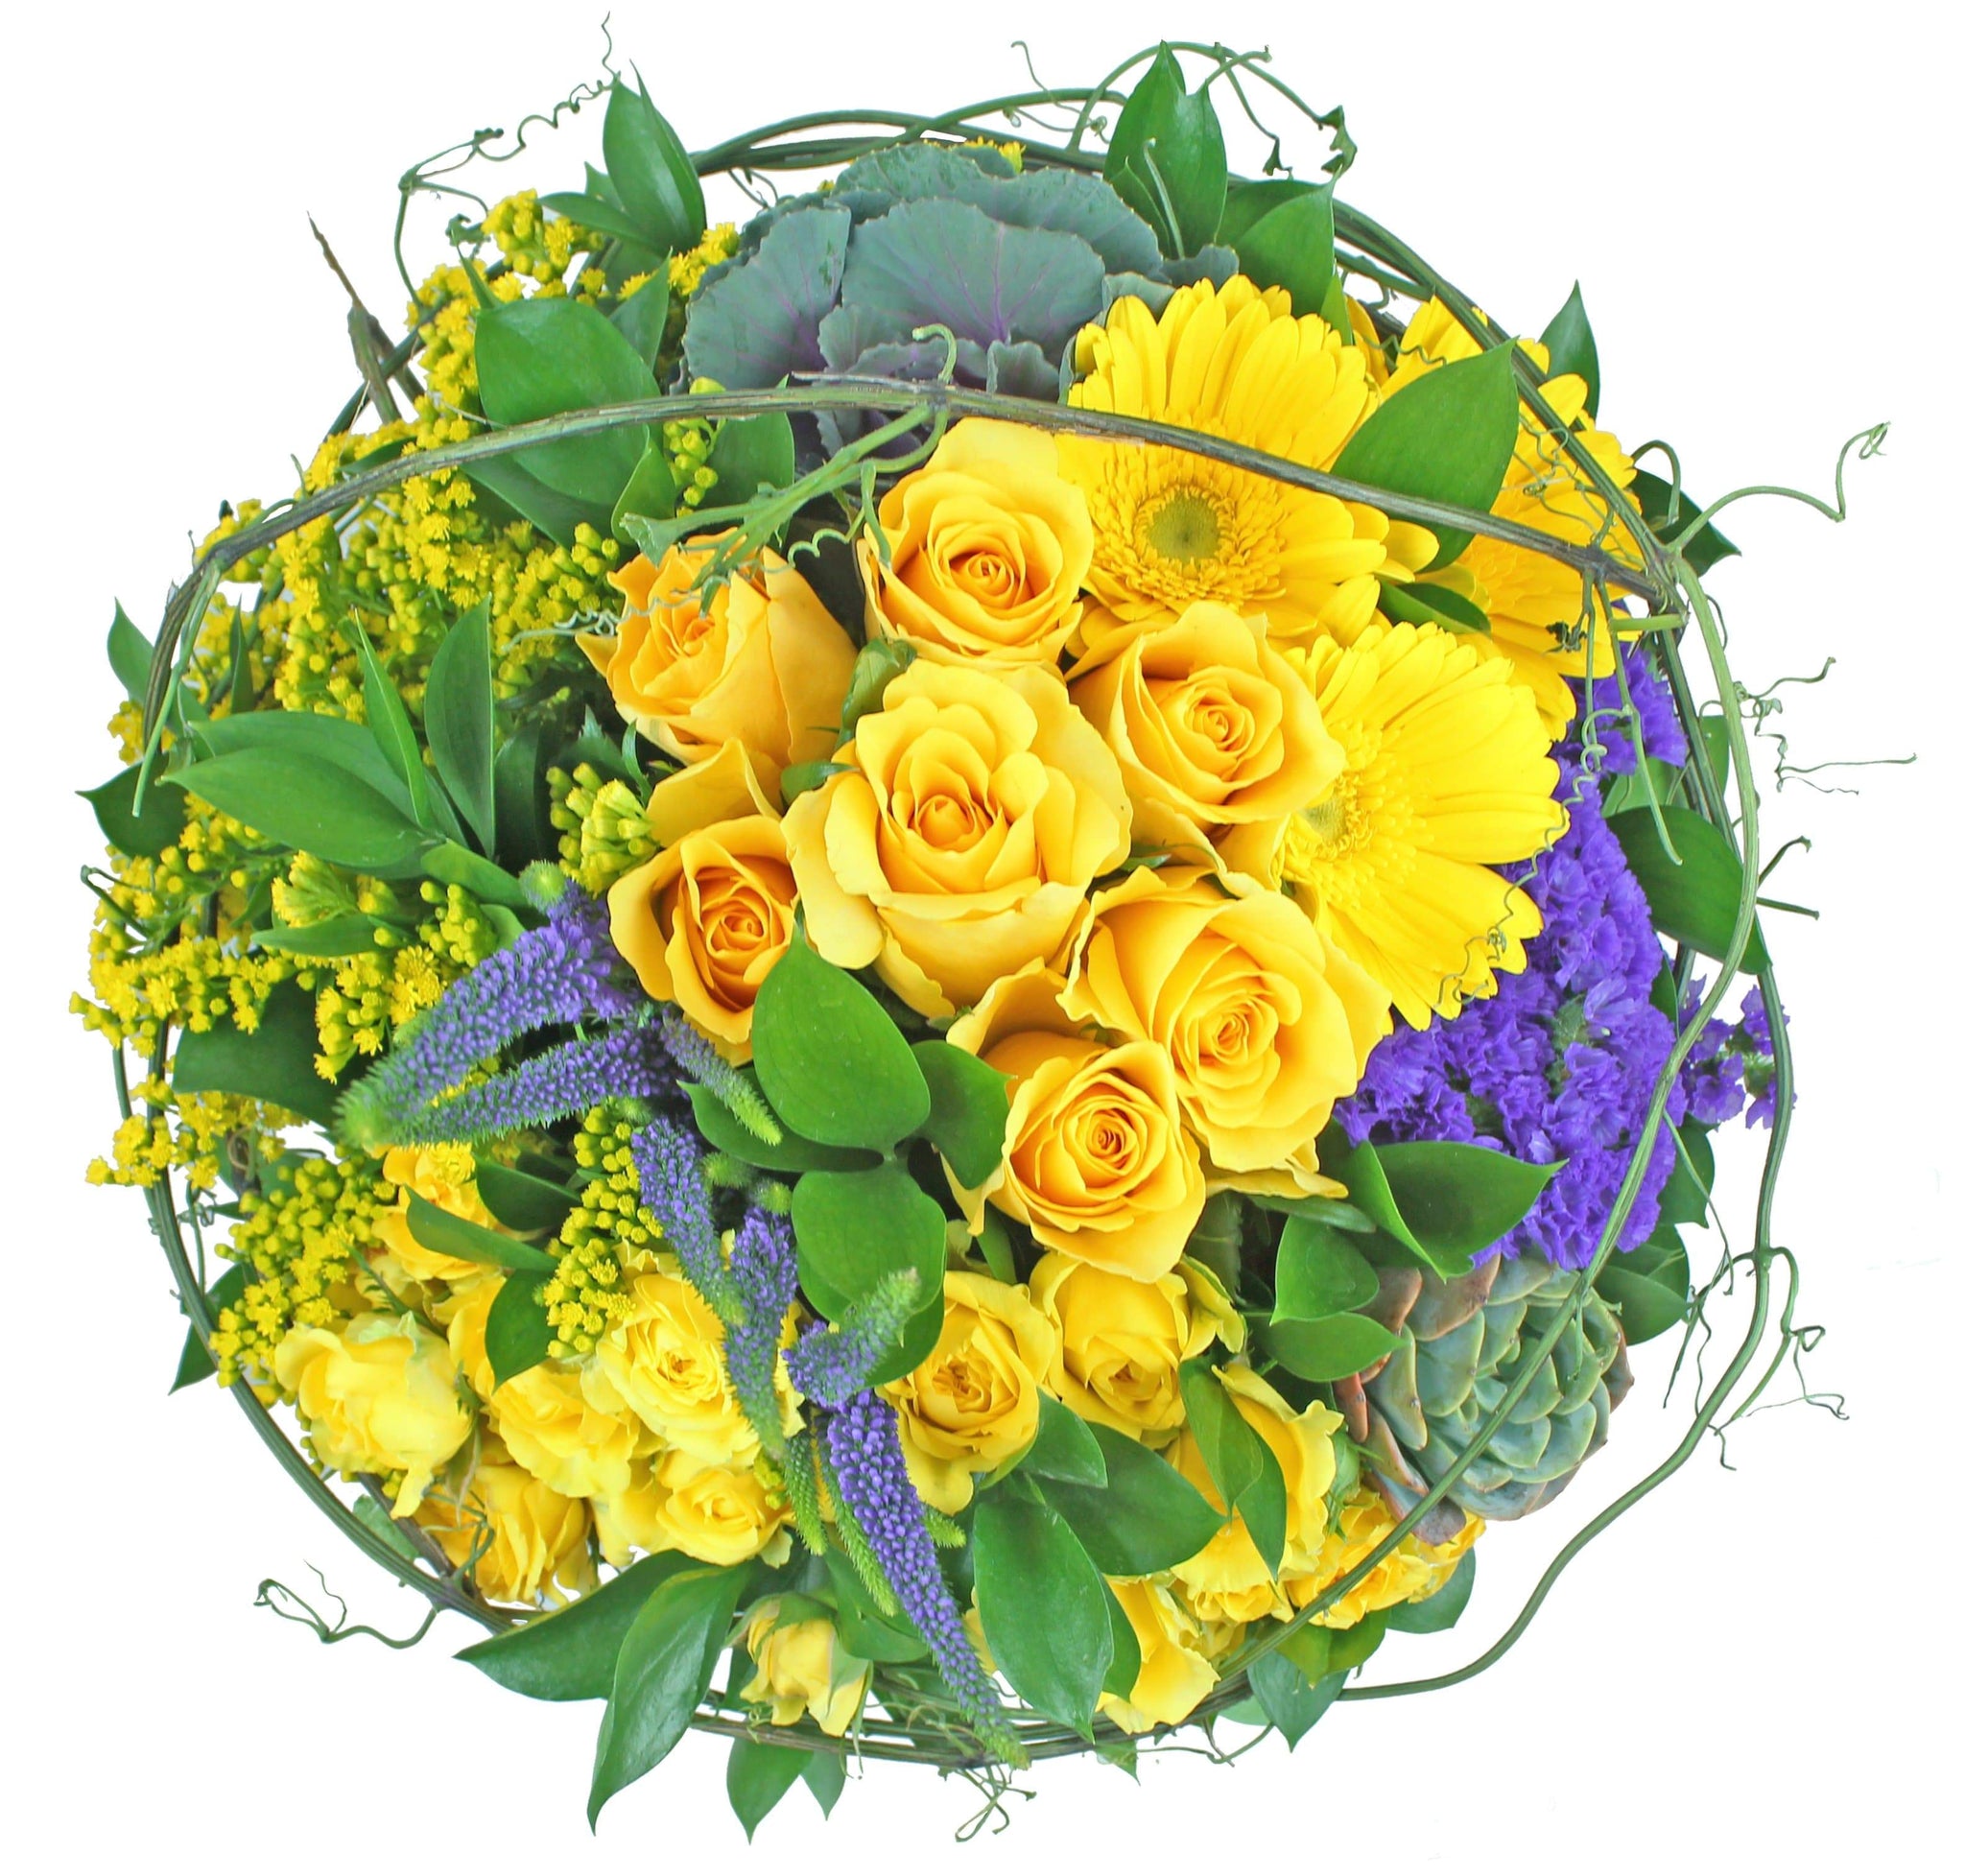 Bright floral design of 46 stems in yellow and purple shades. Perfect to send as a congratulatory gift or to express joy and friendship.